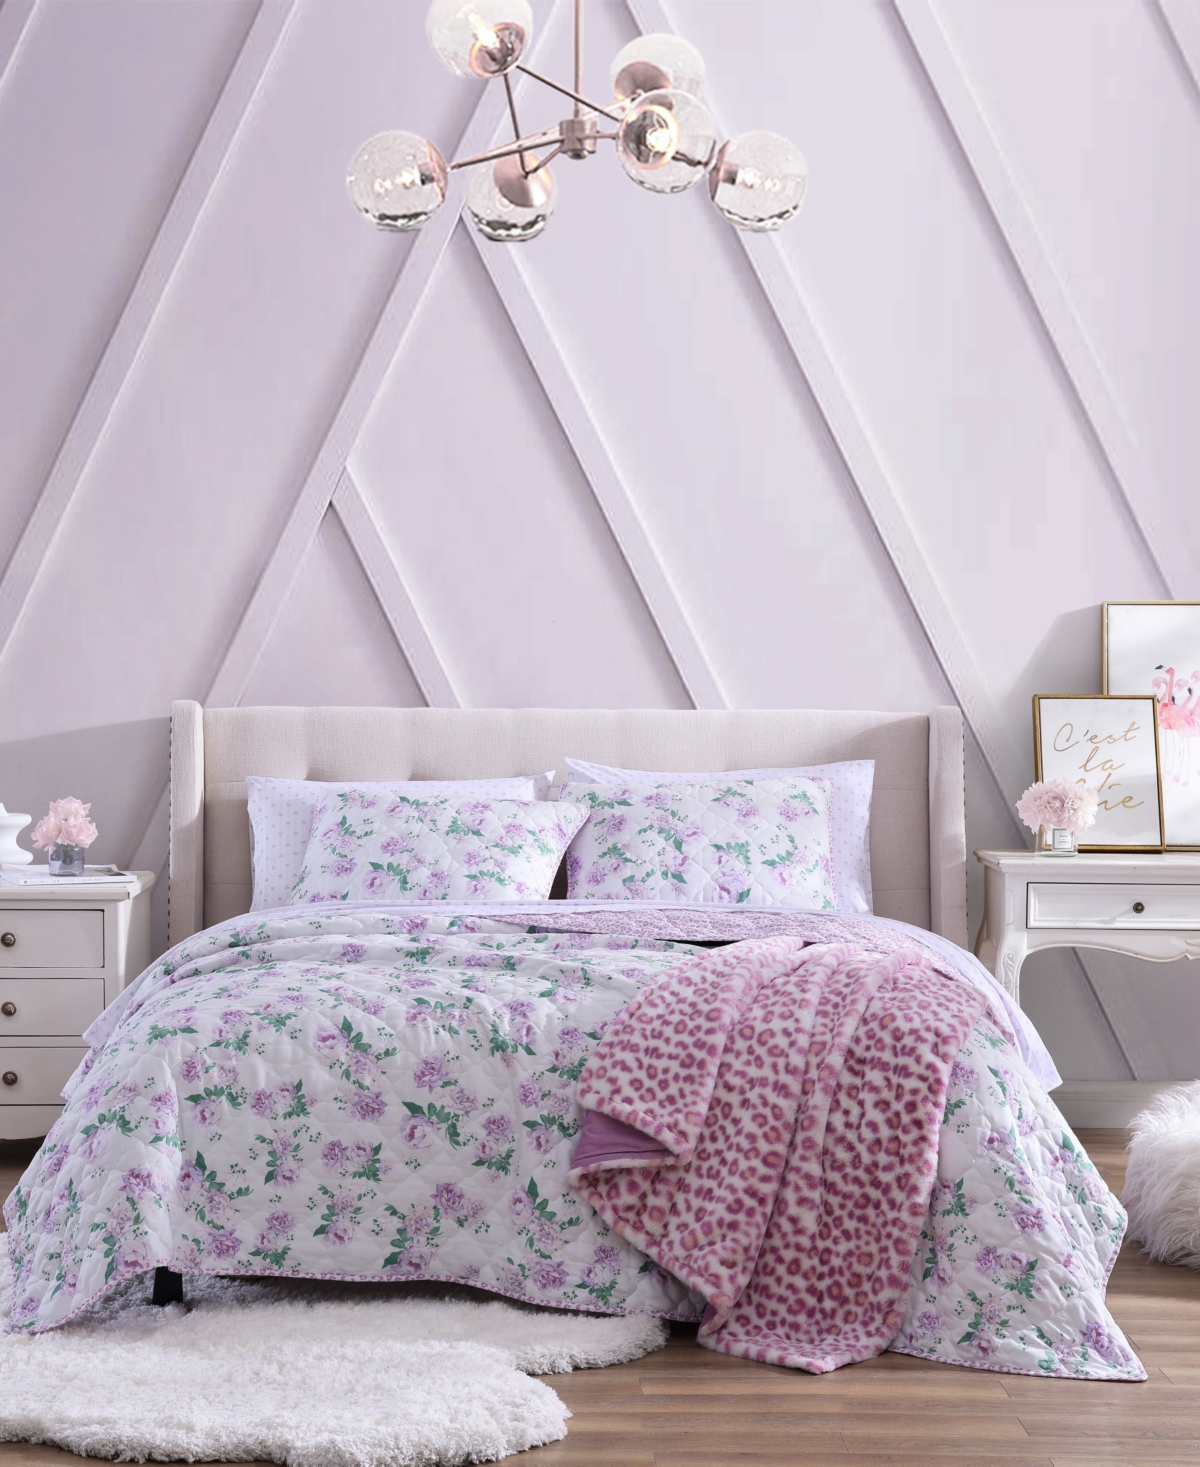 Betsey Johnson 2 Piece Blooming Roses Quilt Set, Twin Bedding In Lavender